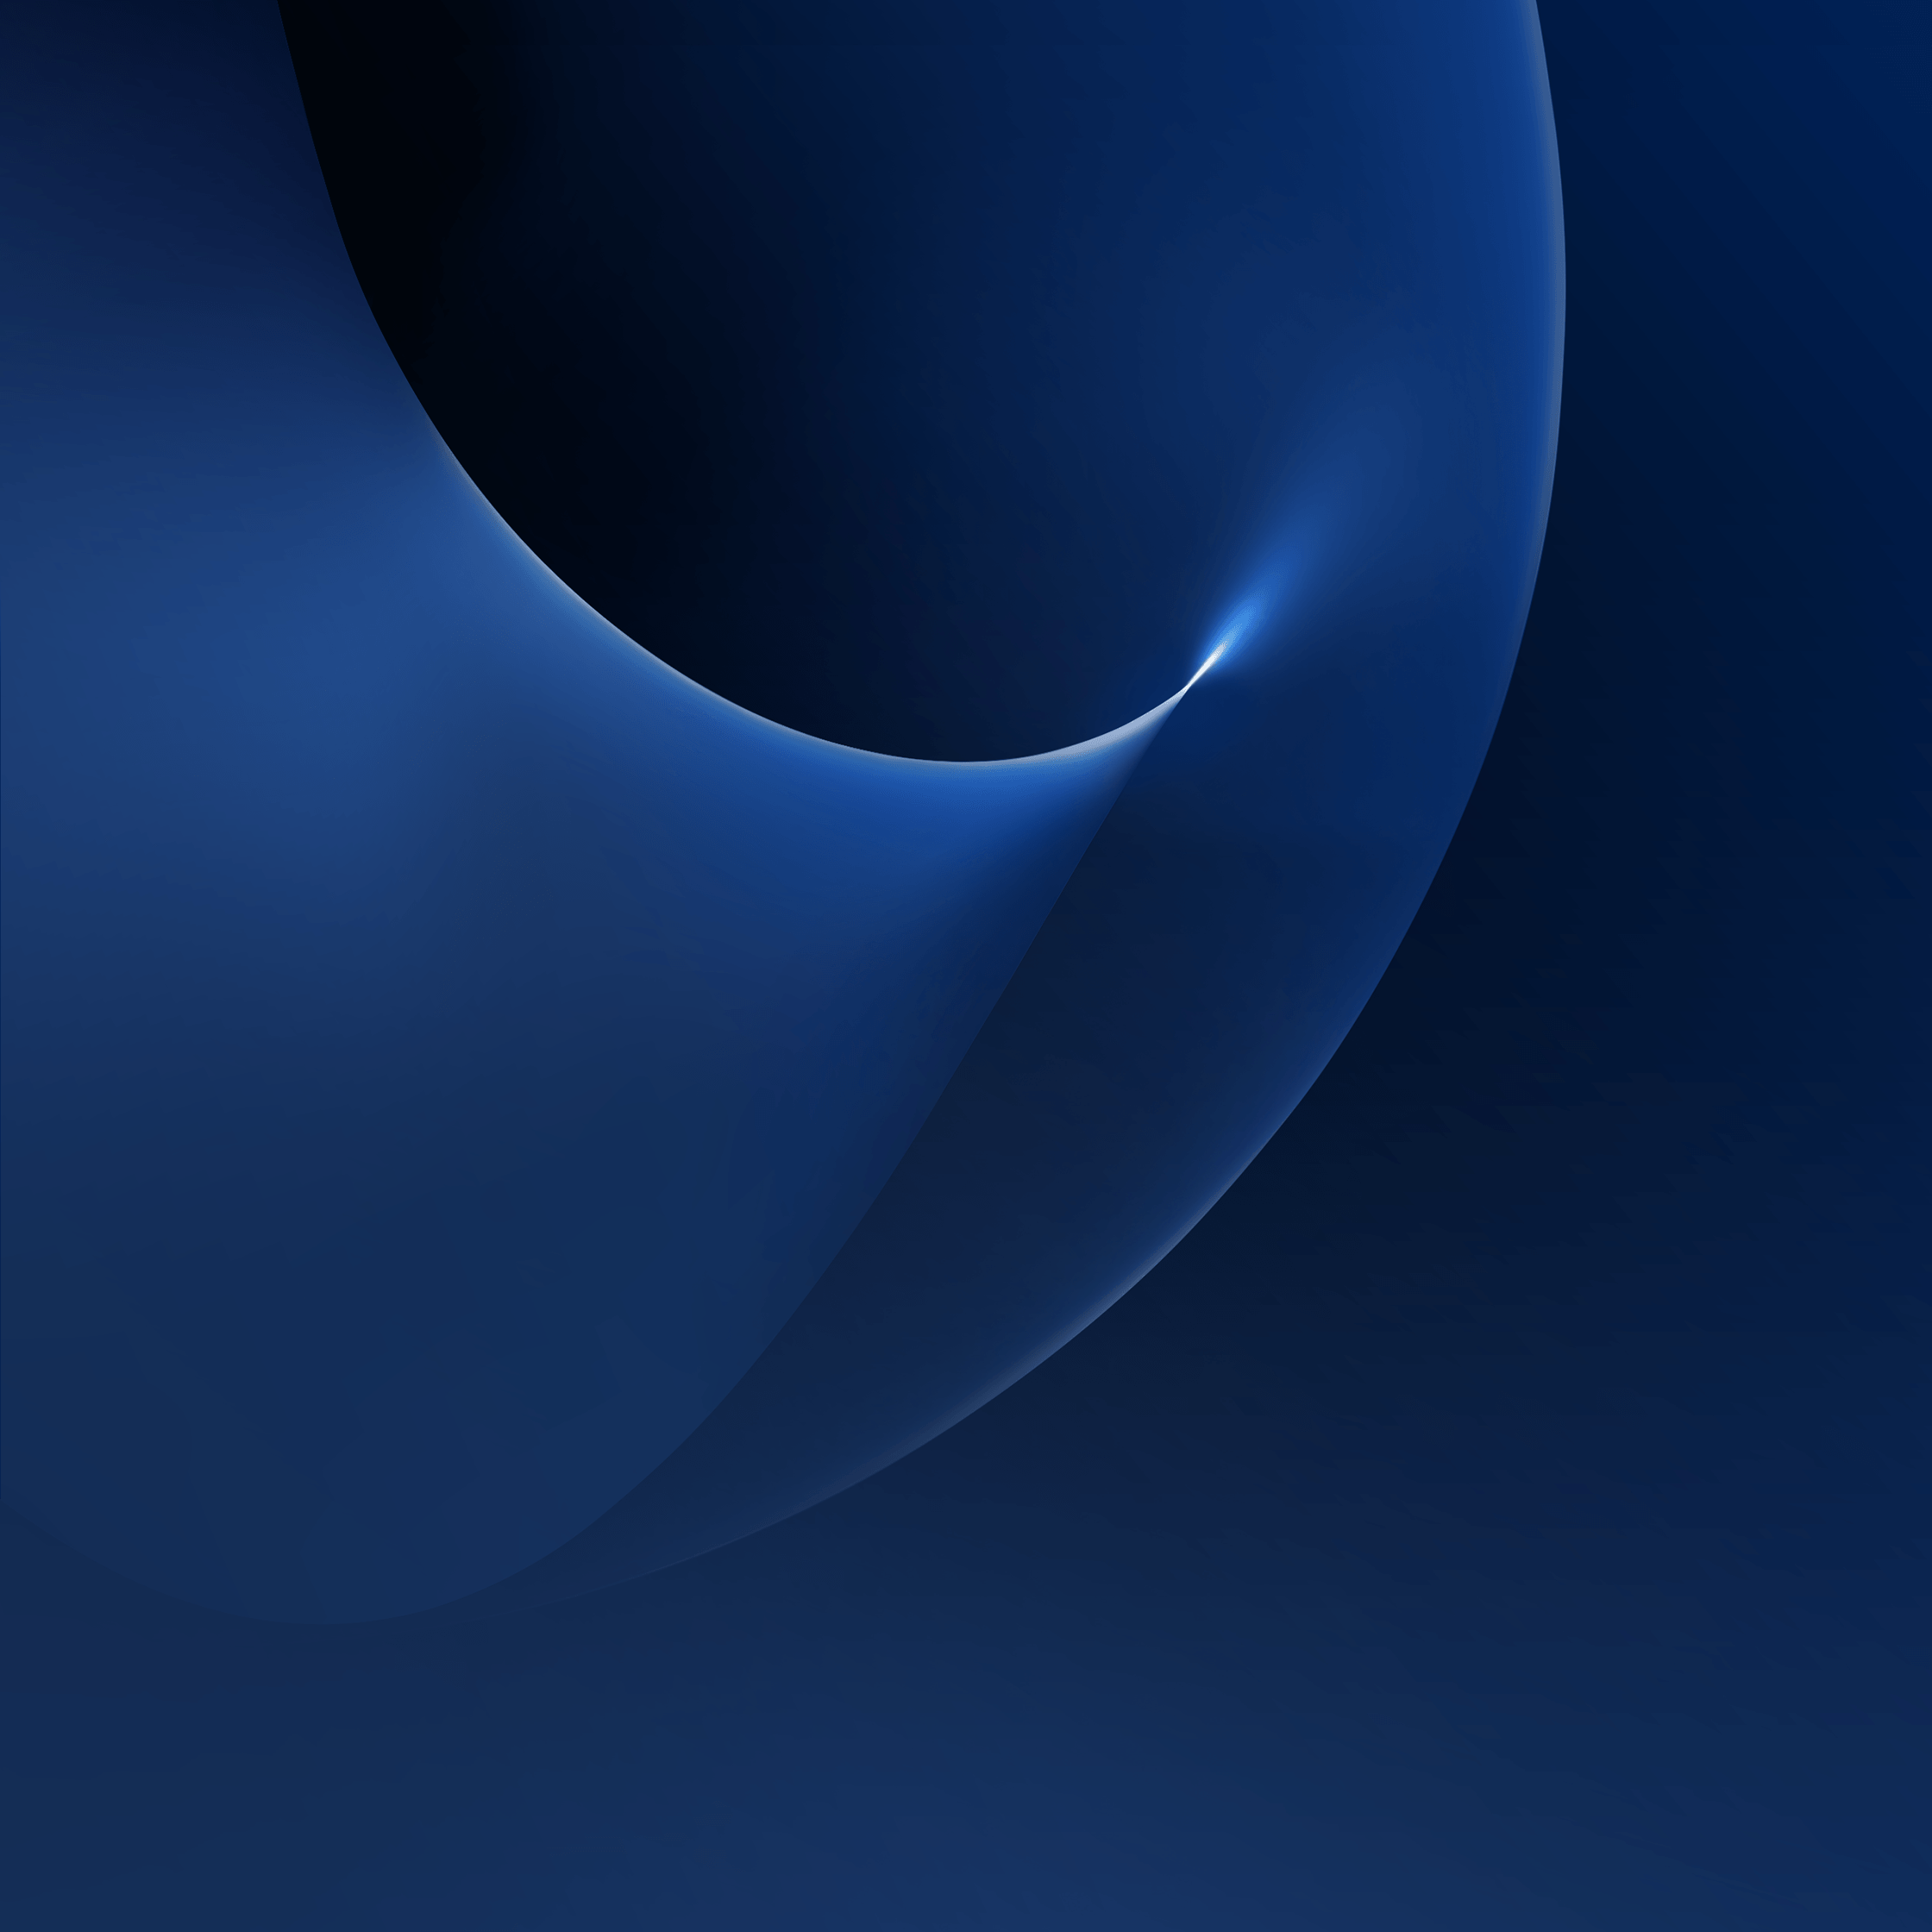 Galaxy S7 Stock Wallpapers